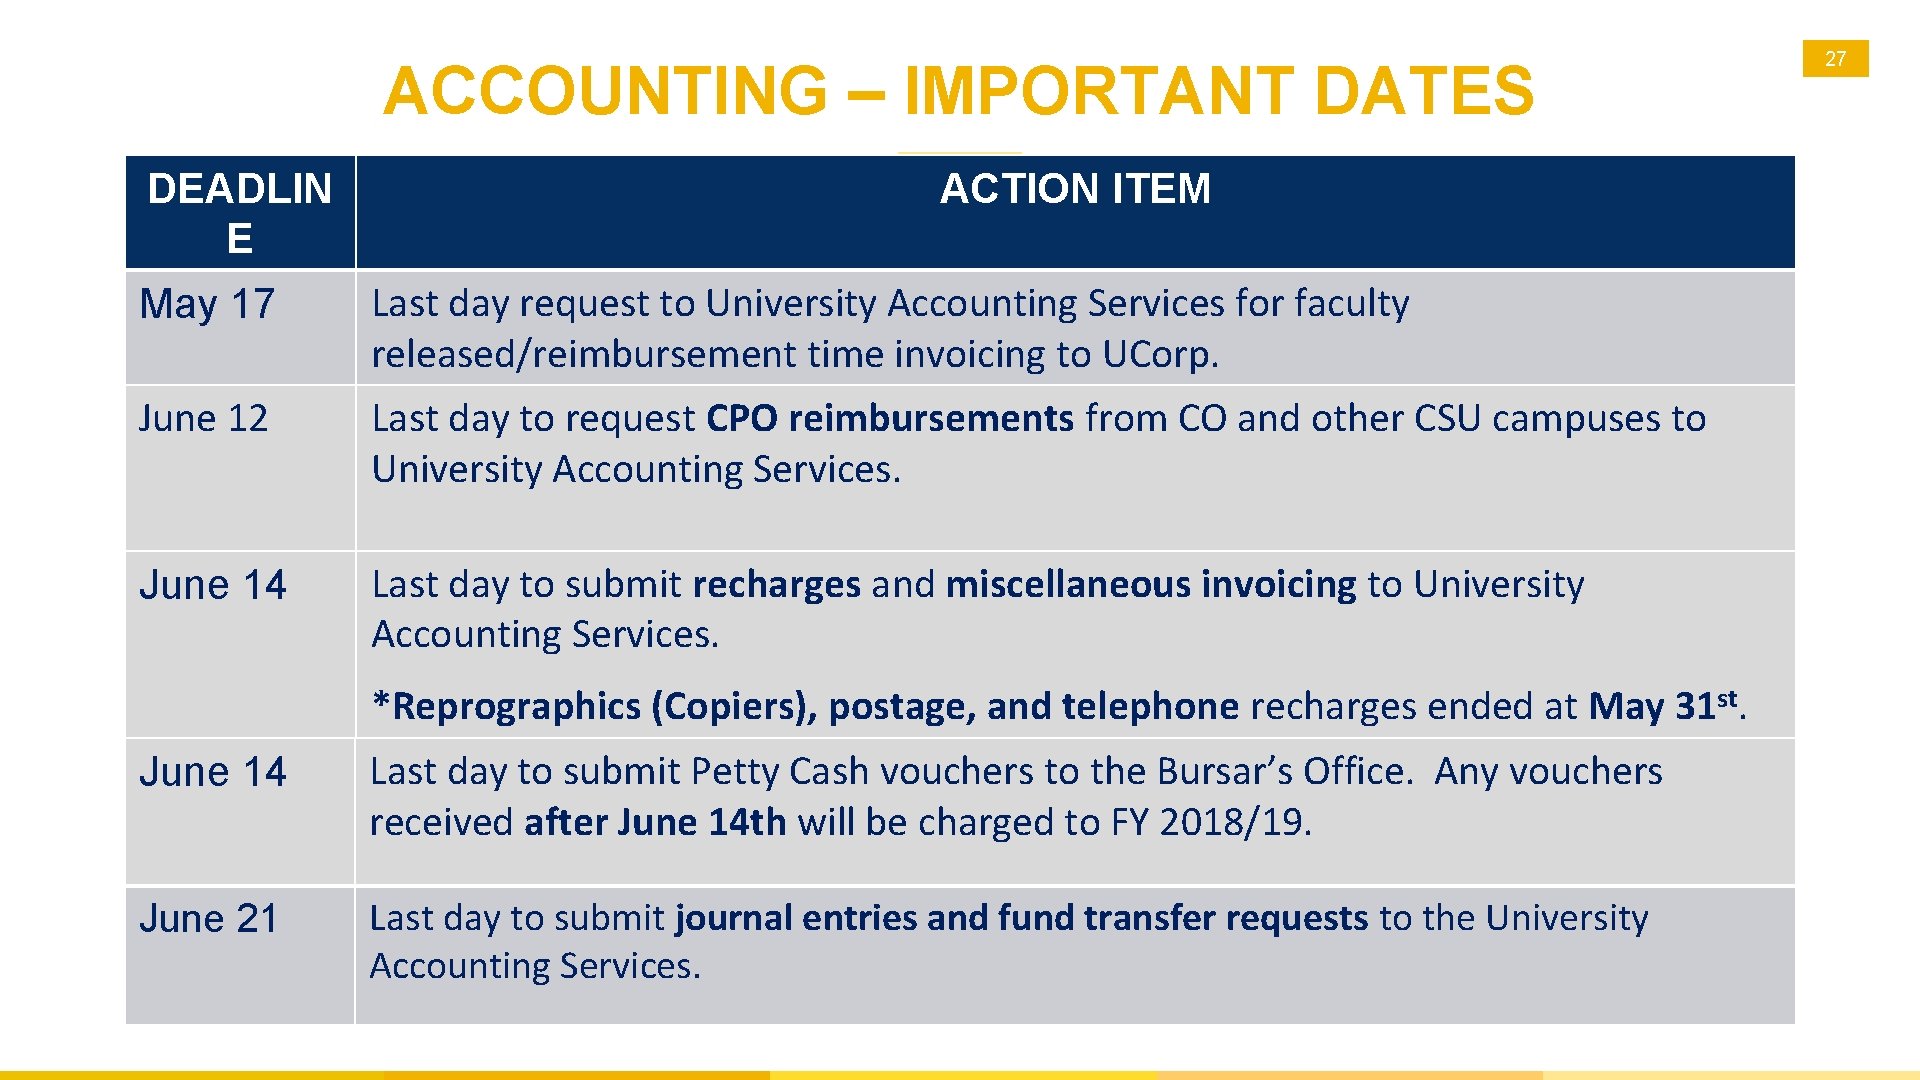 ACCOUNTING – IMPORTANT DATES DEADLIN E ACTION ITEM May 17 Last day request to